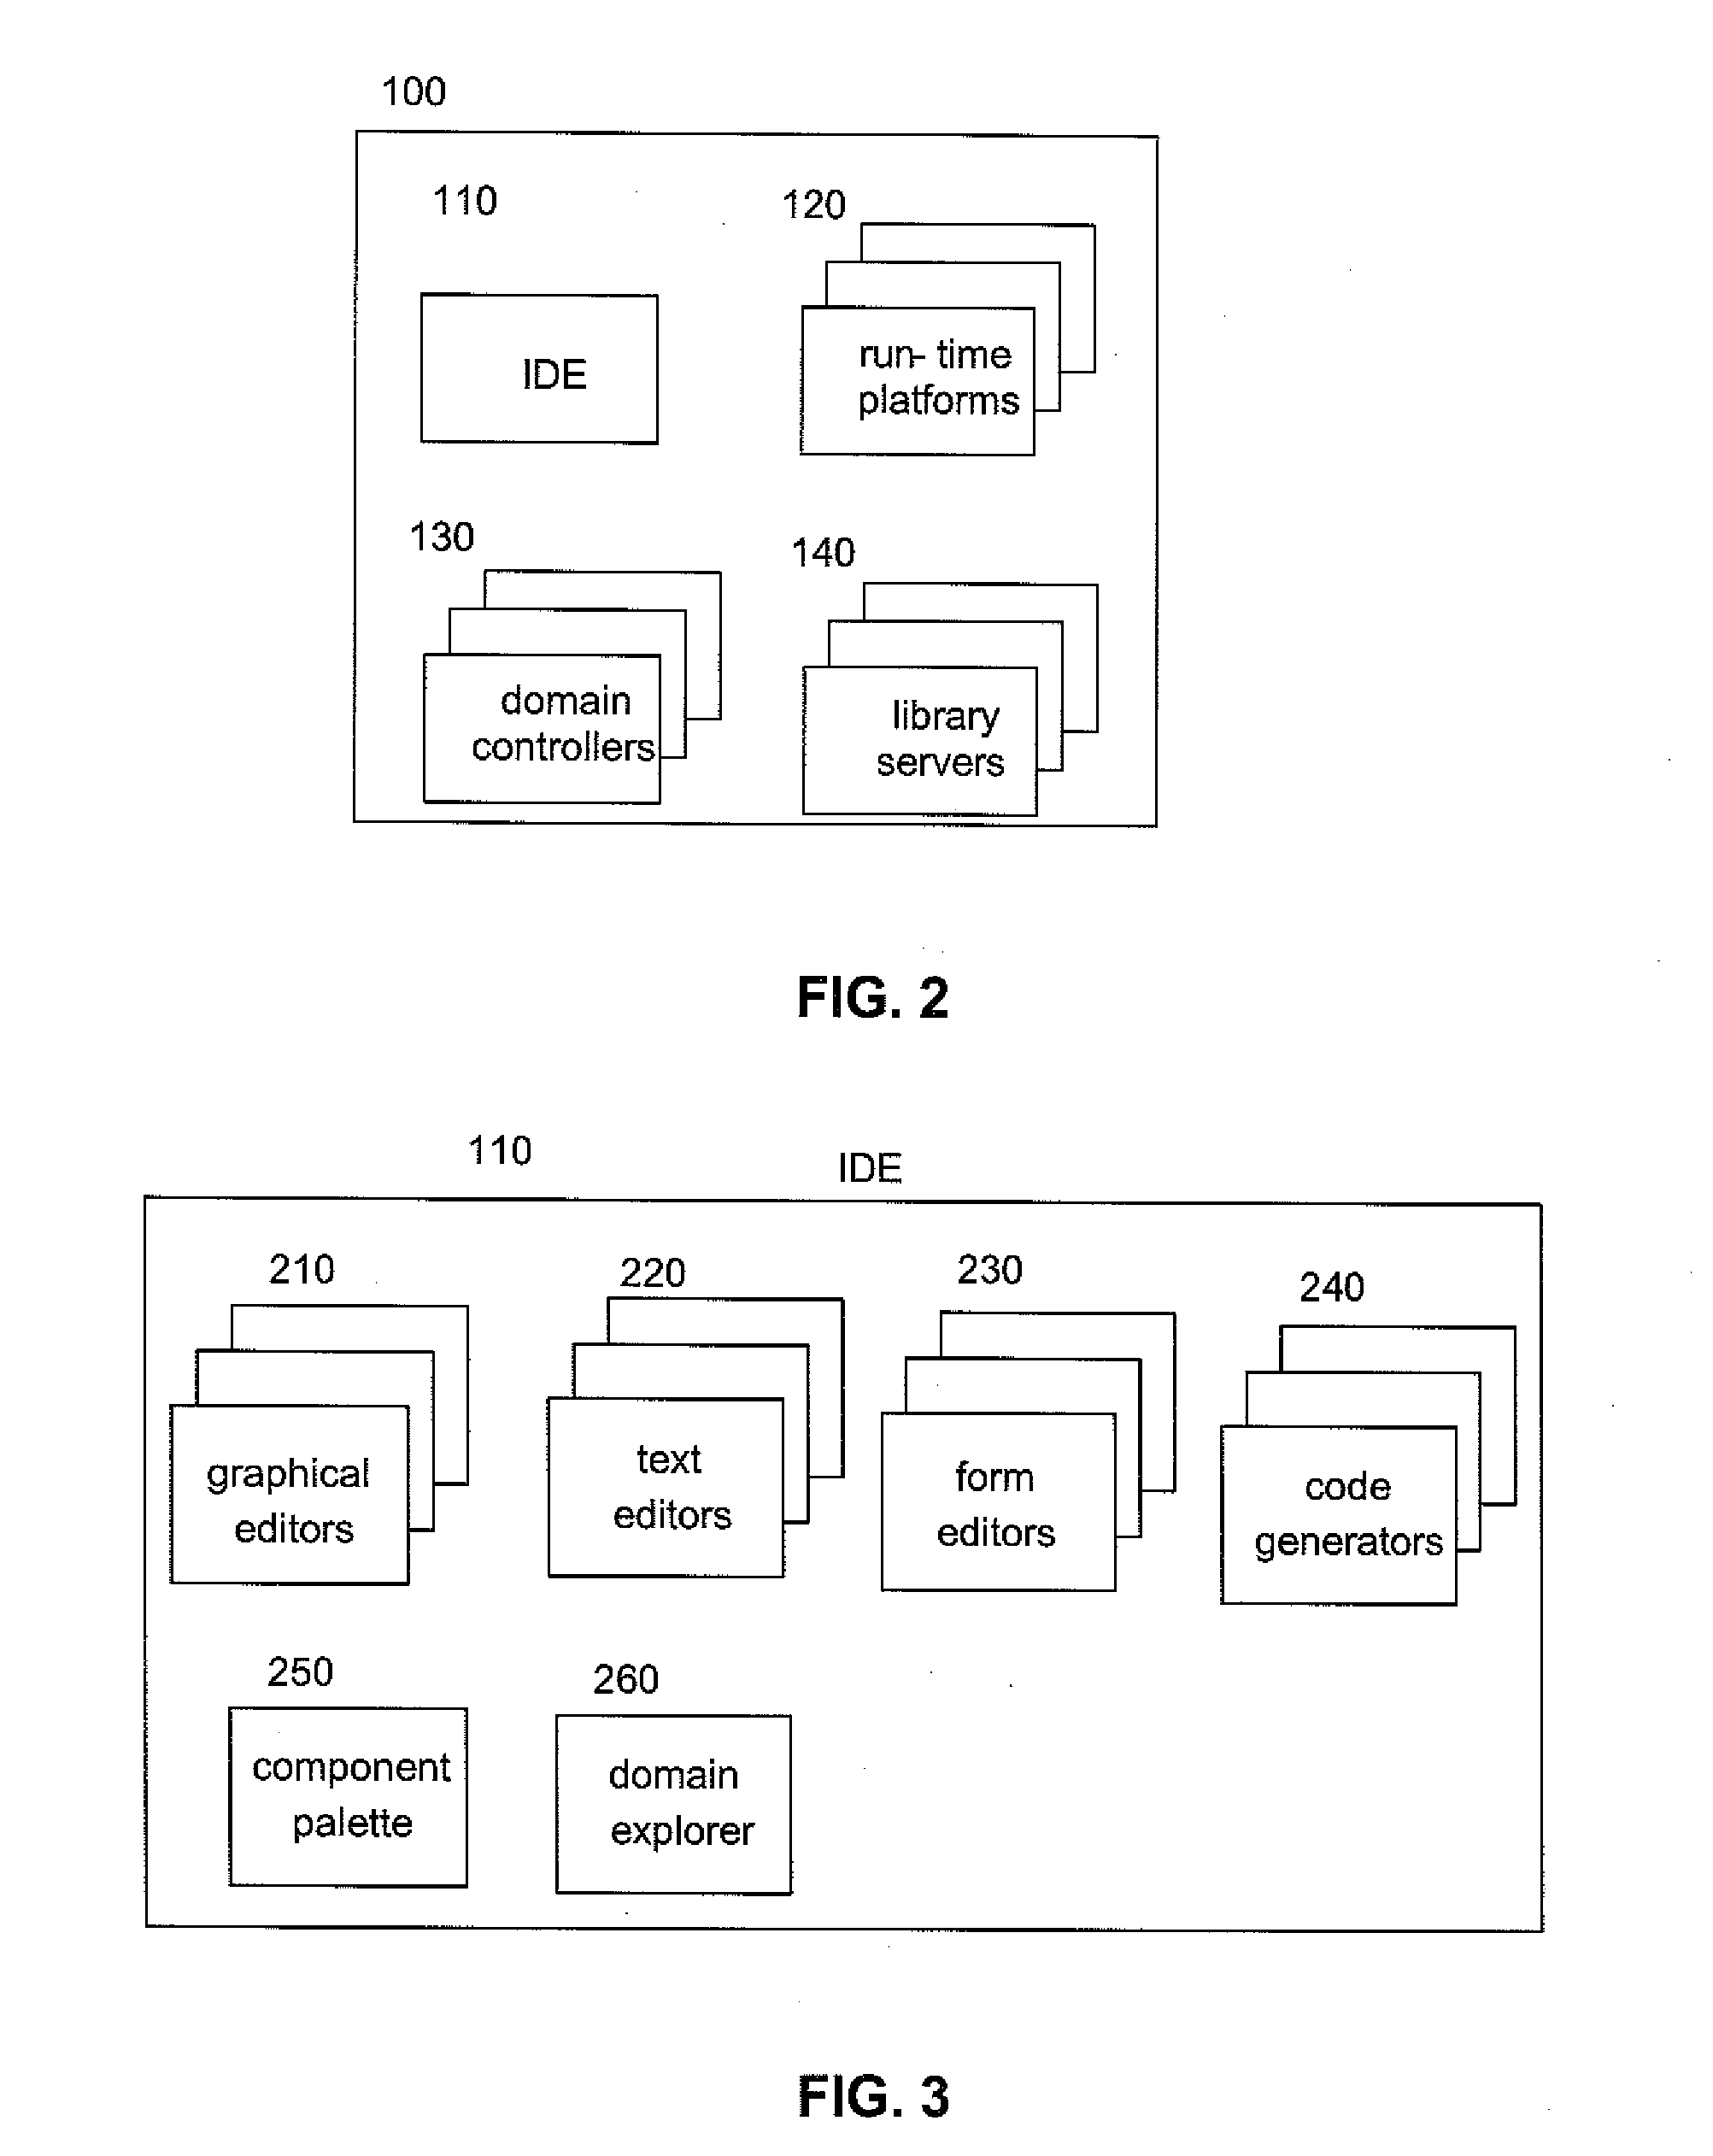 System and method for developing and deploying sensor and actuator applications over distributed computing infrastructure